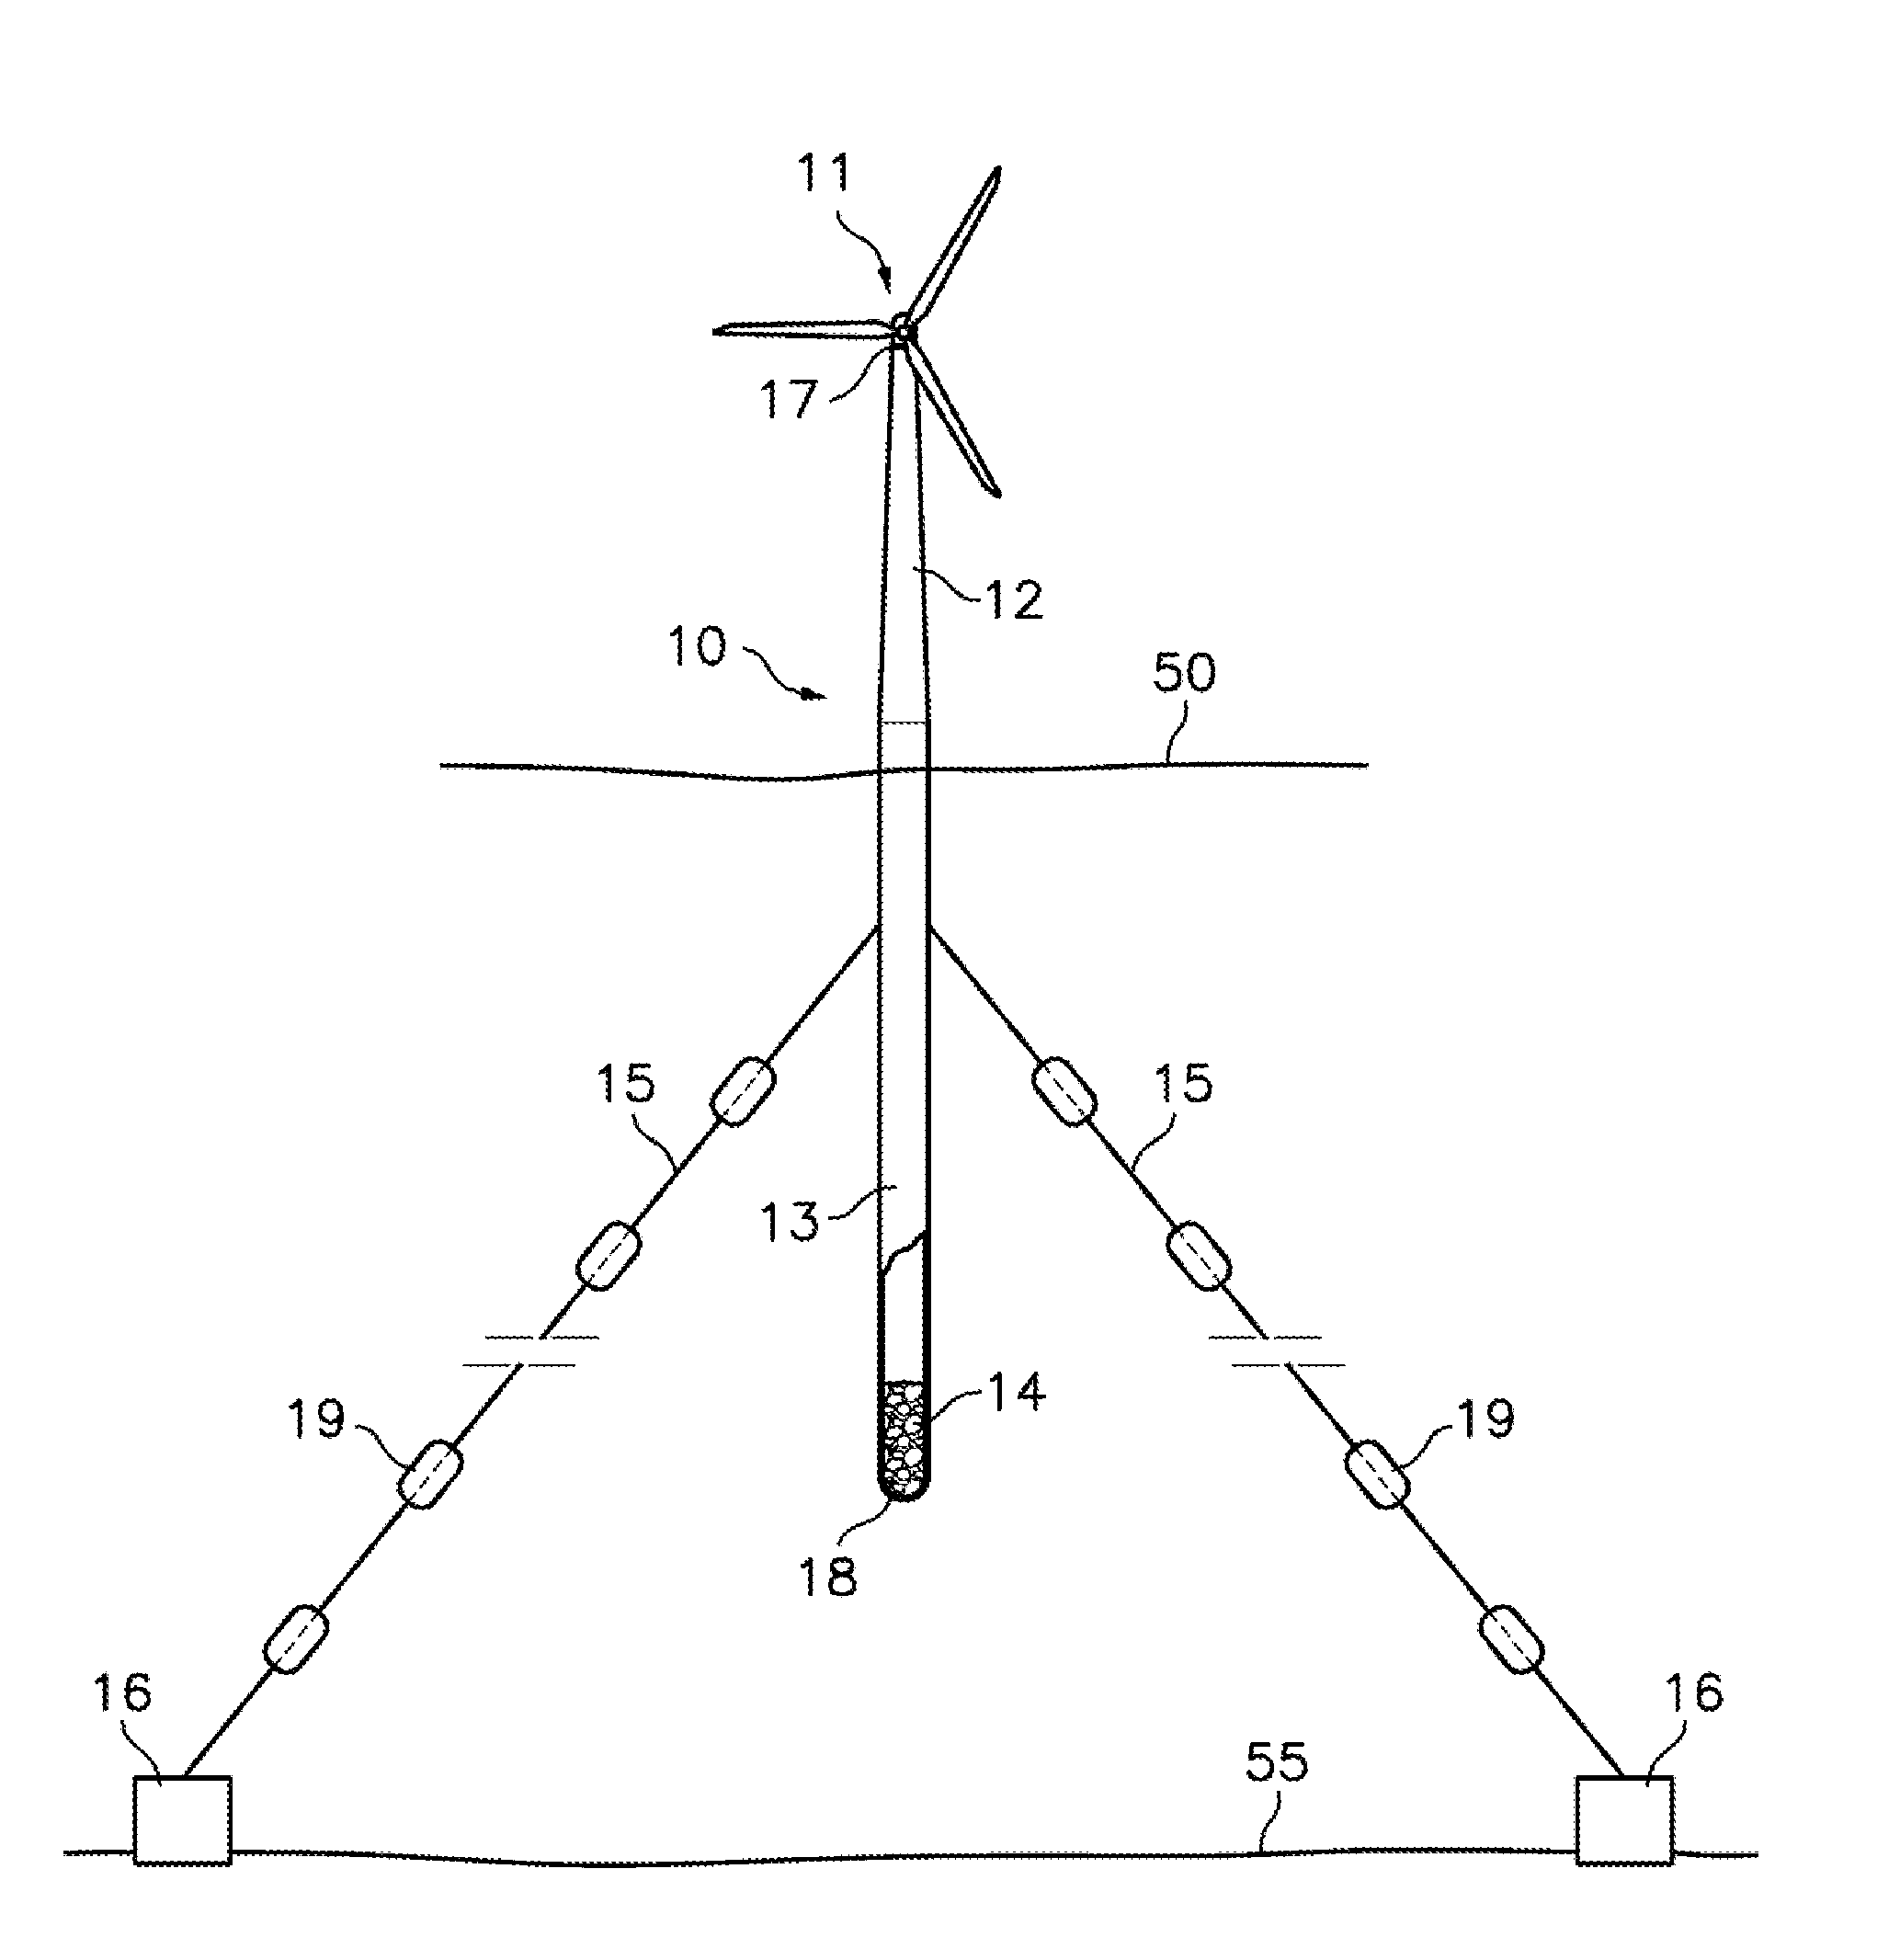 Floating structure for supporting a wind turbine